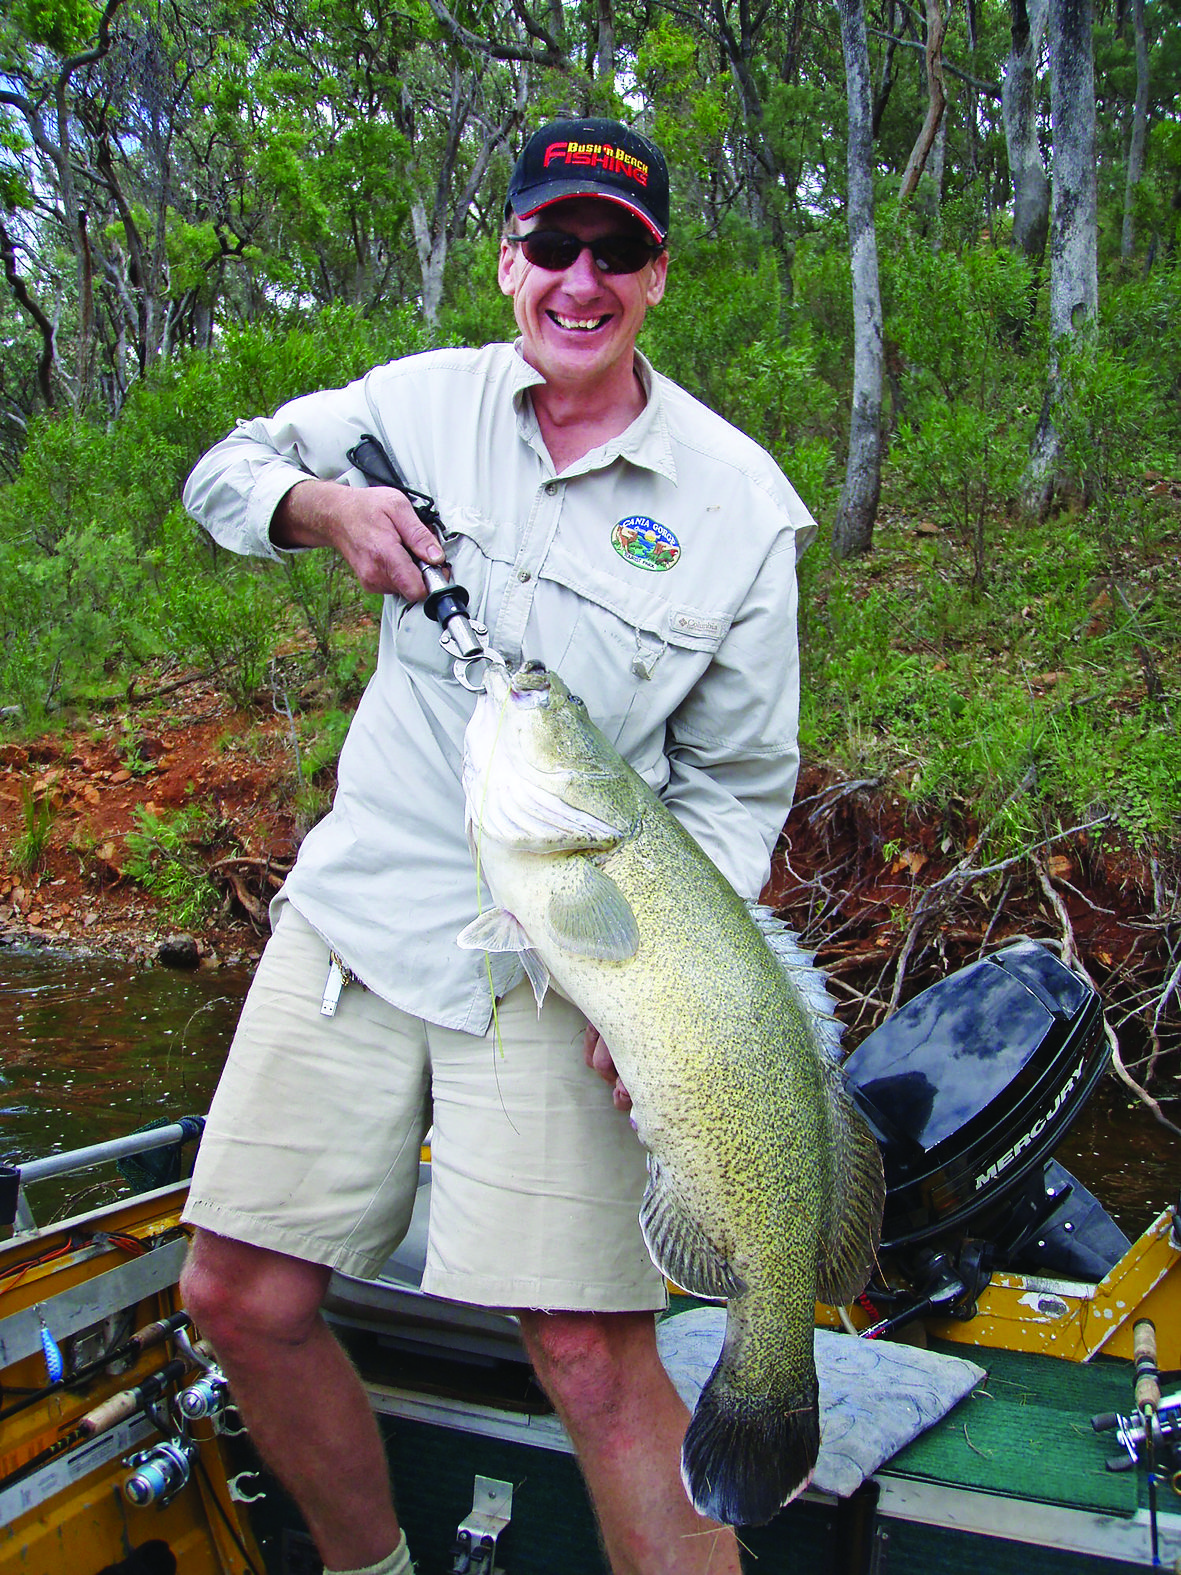 Connolly Dam has a great reputation for producing quality cod catches in autumn on live bait and lures.